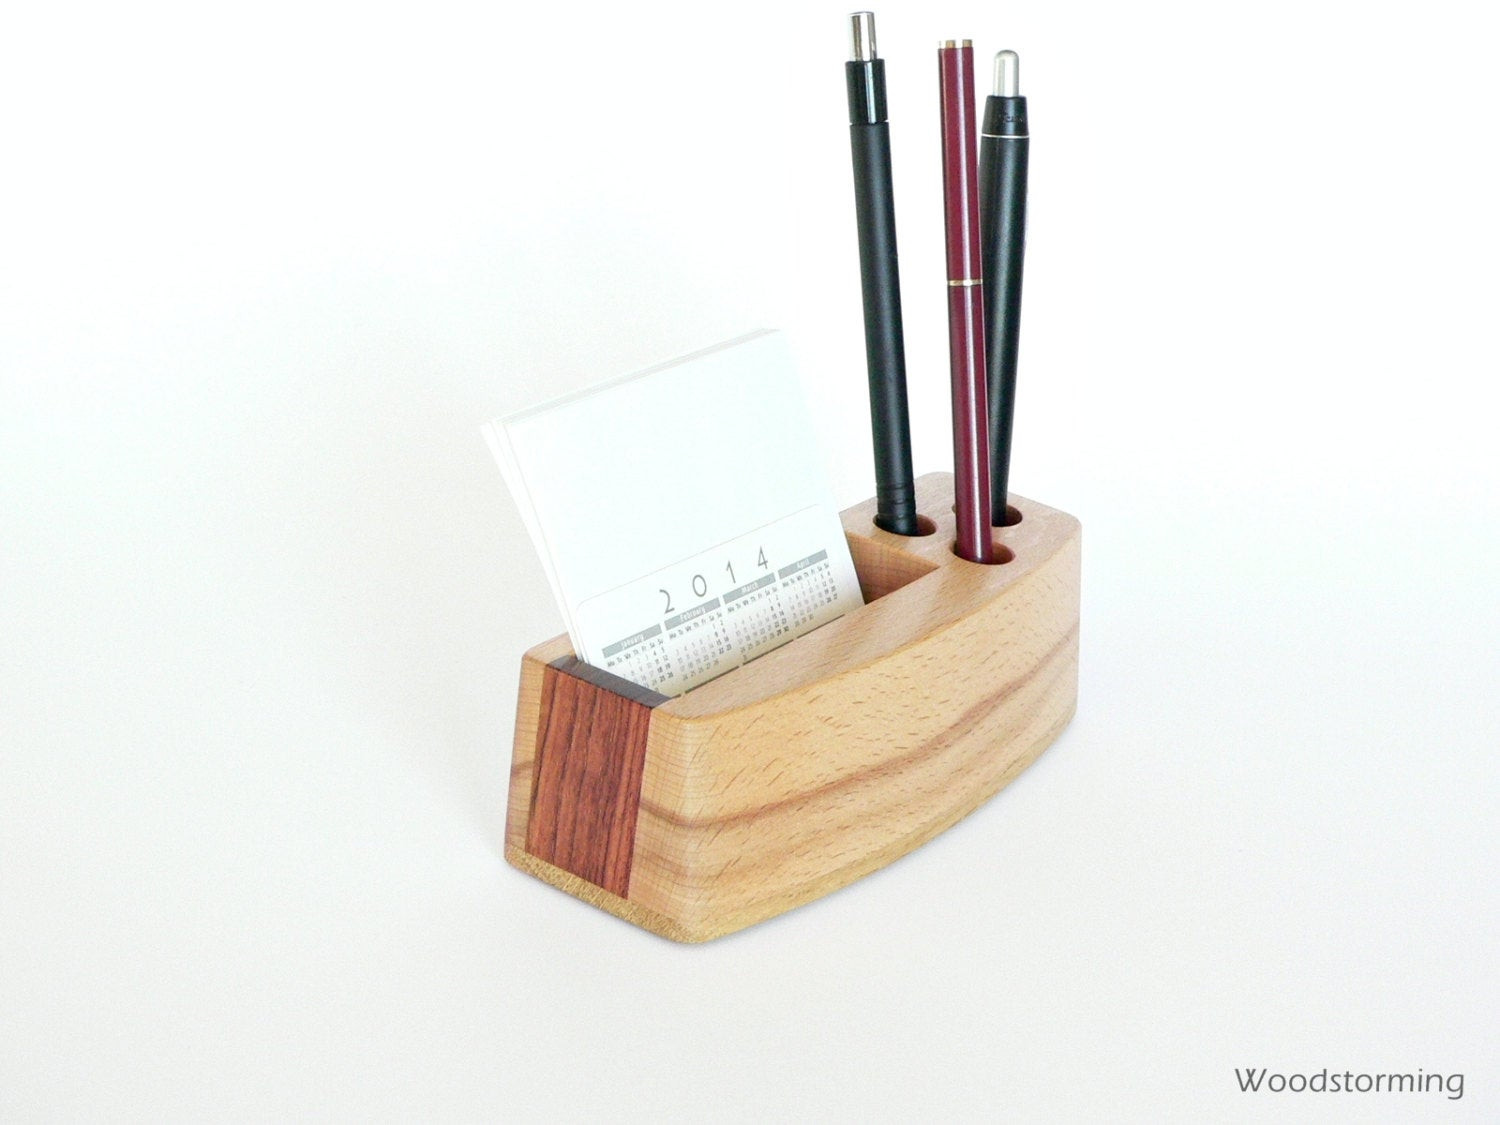 Small Desk Organizer
 Request a custom order and have something made just for you